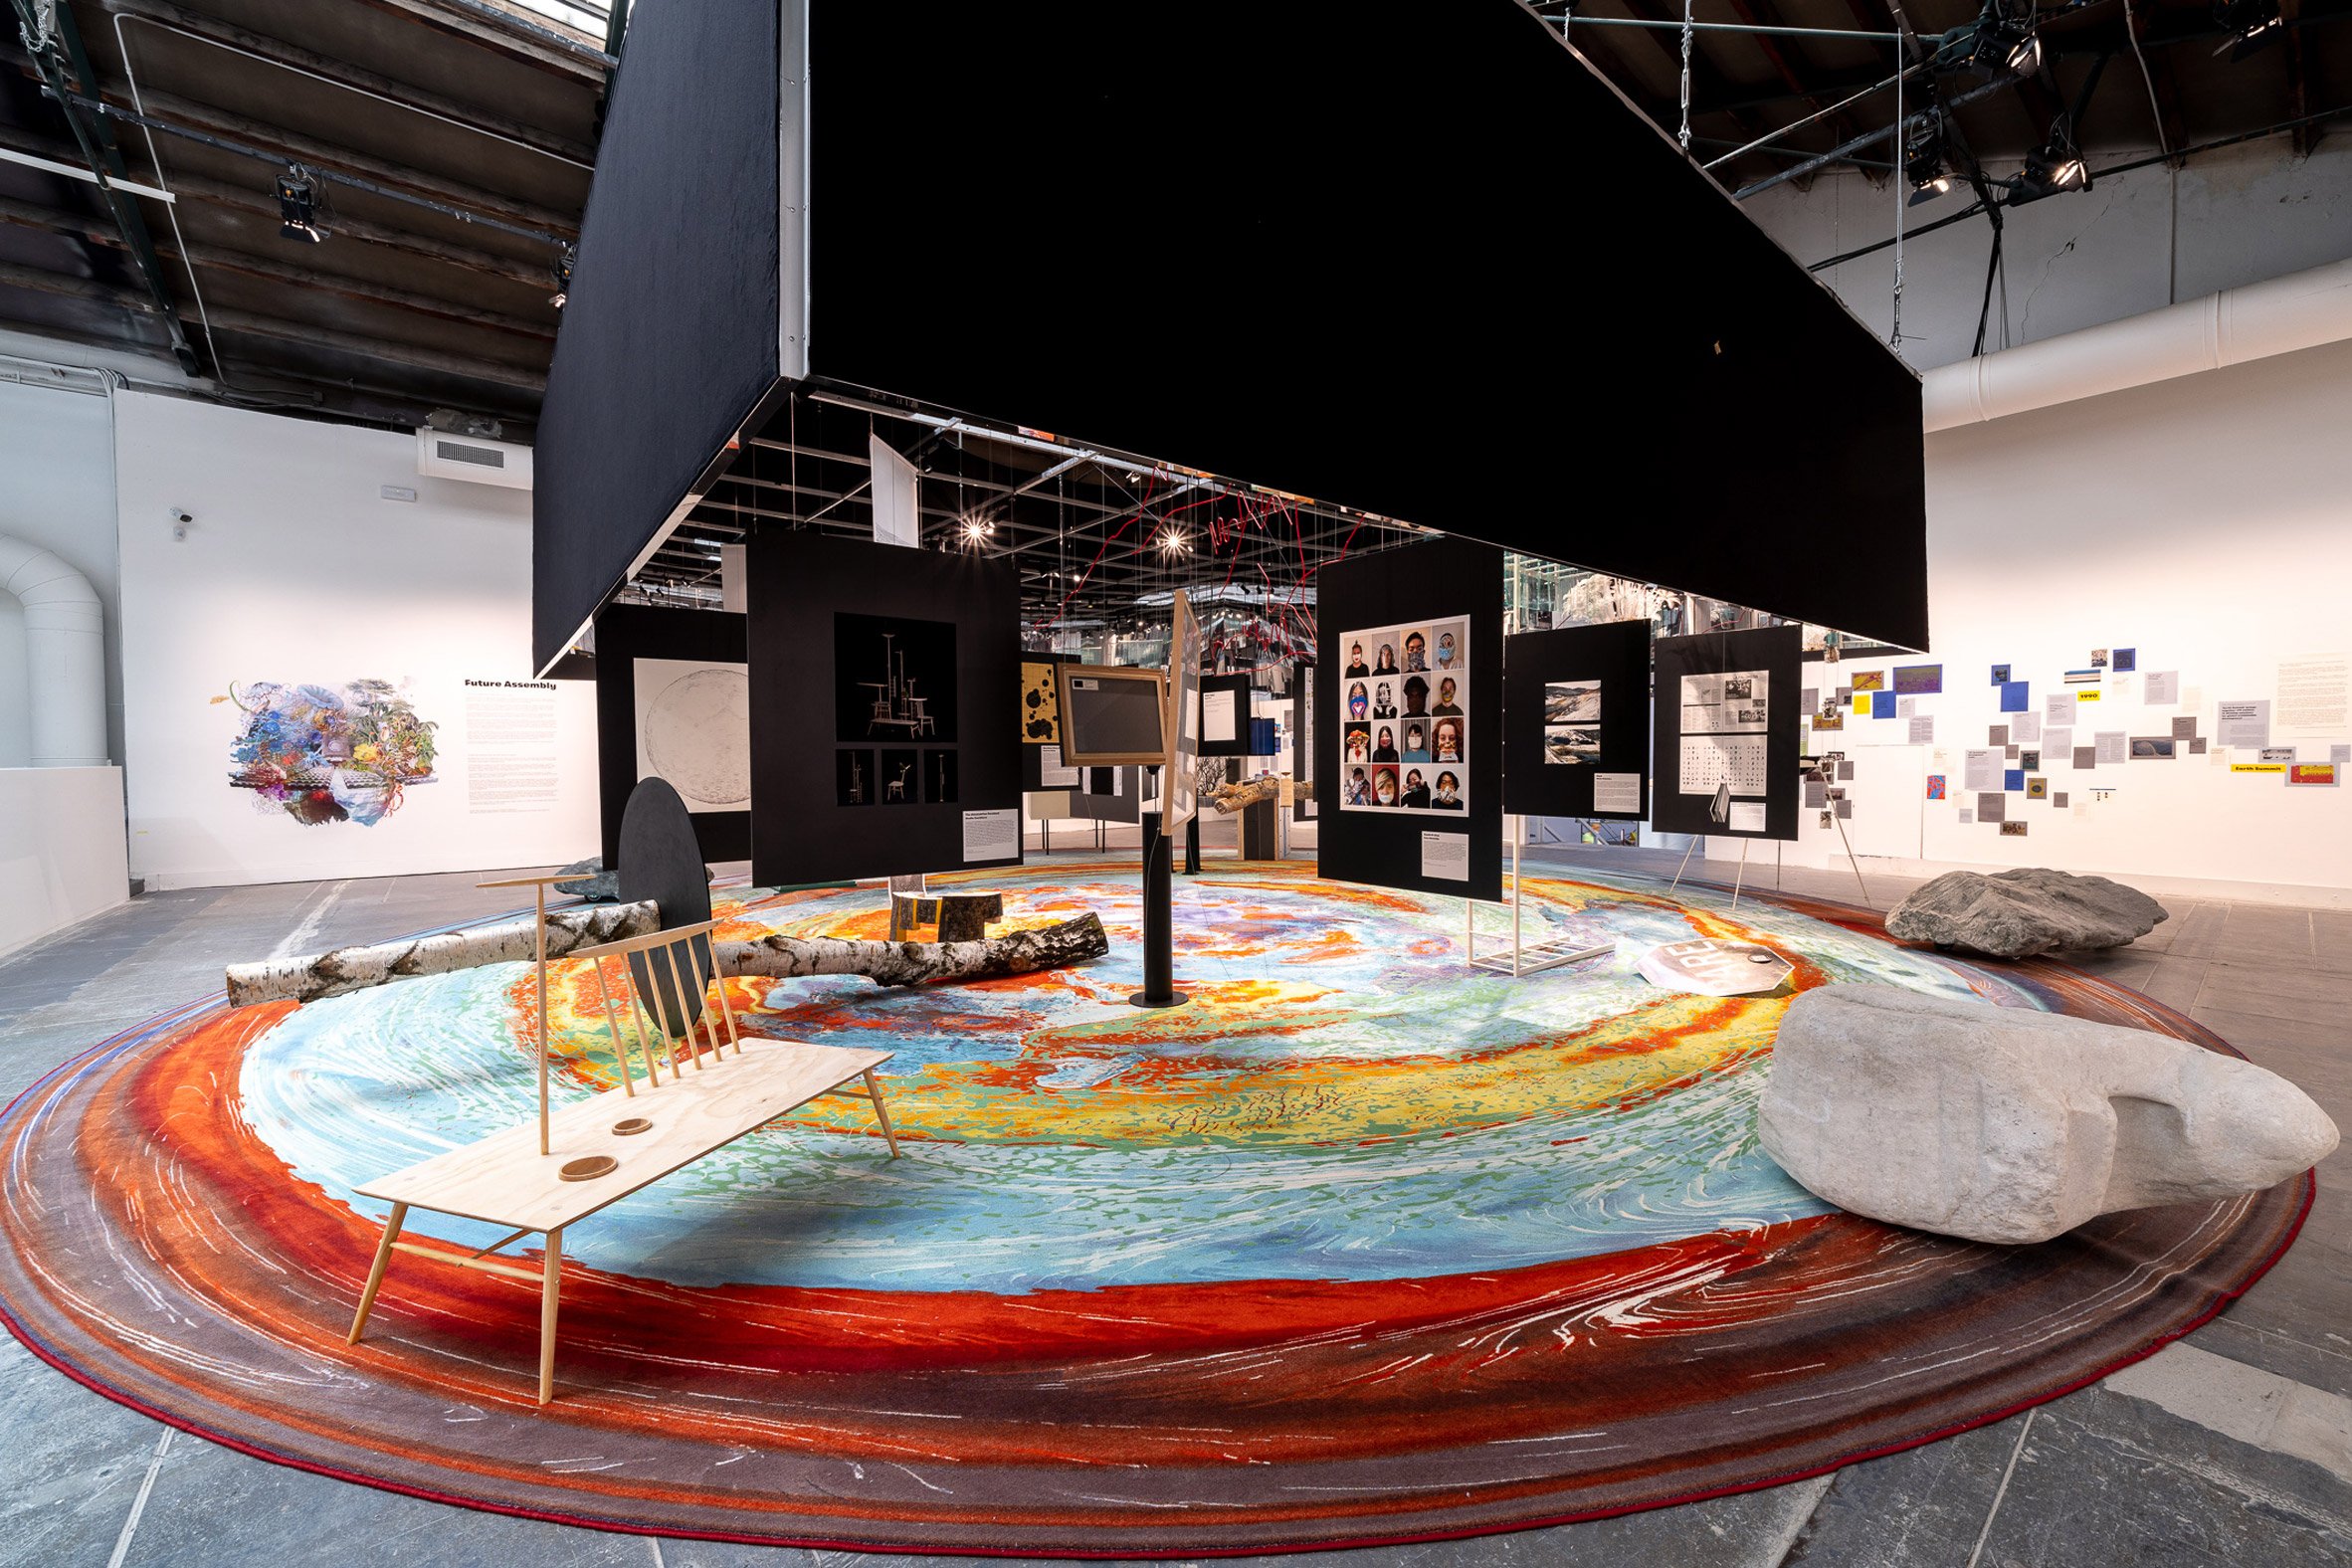 A circular rug covers the floor of the Future Assembly installation